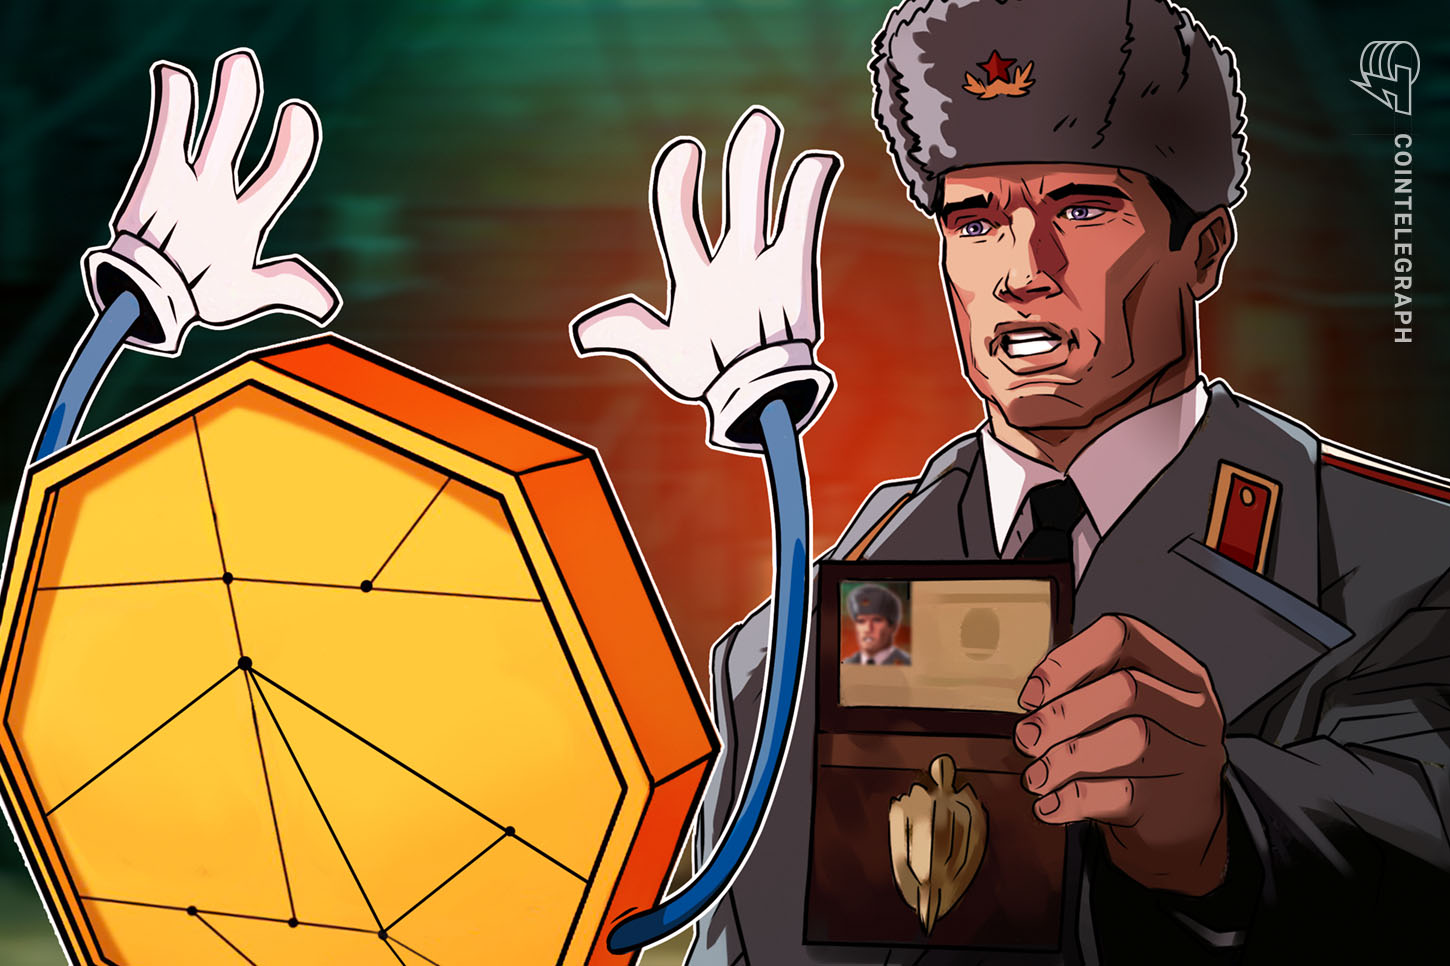 Russian officers should disclose their crypto holdings by June 2021